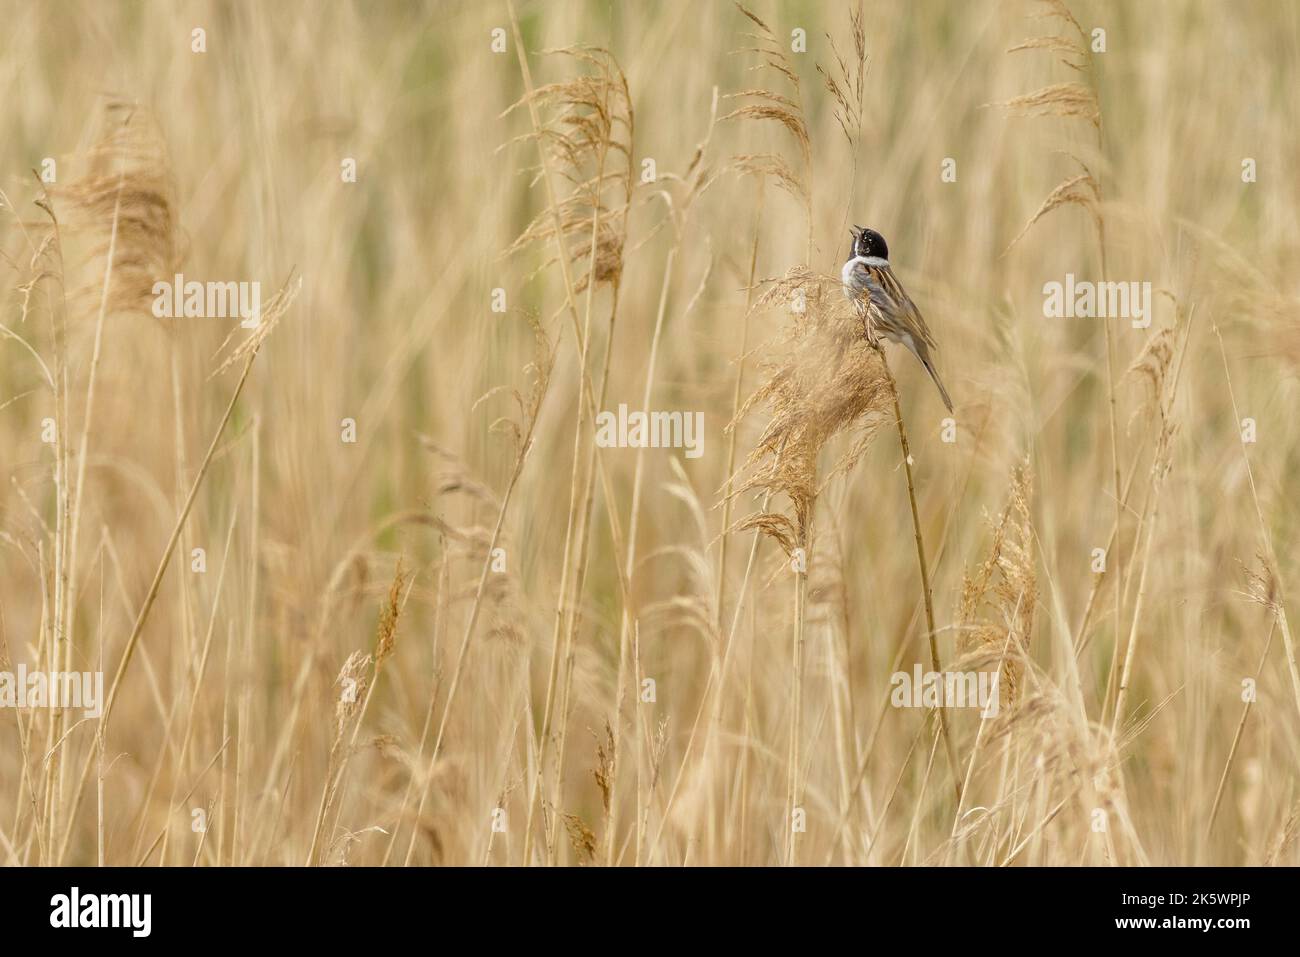 Reed bunting (Emberiza schoeniclus) perched on reeds Stock Photo